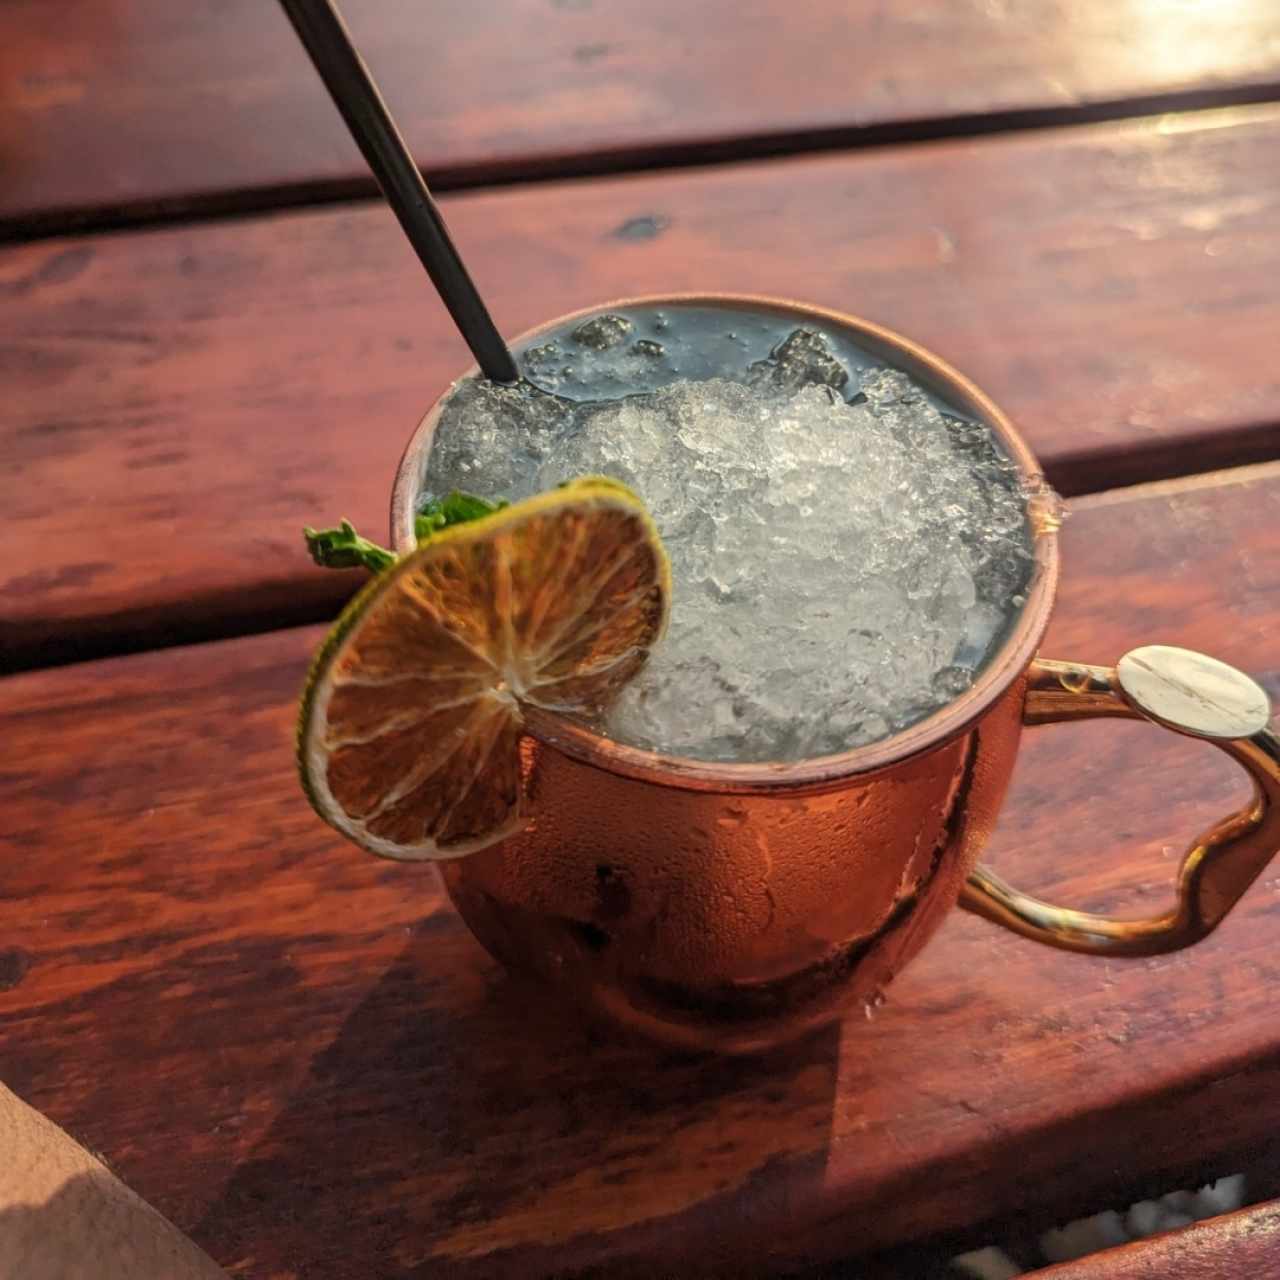 Moscow Mule 